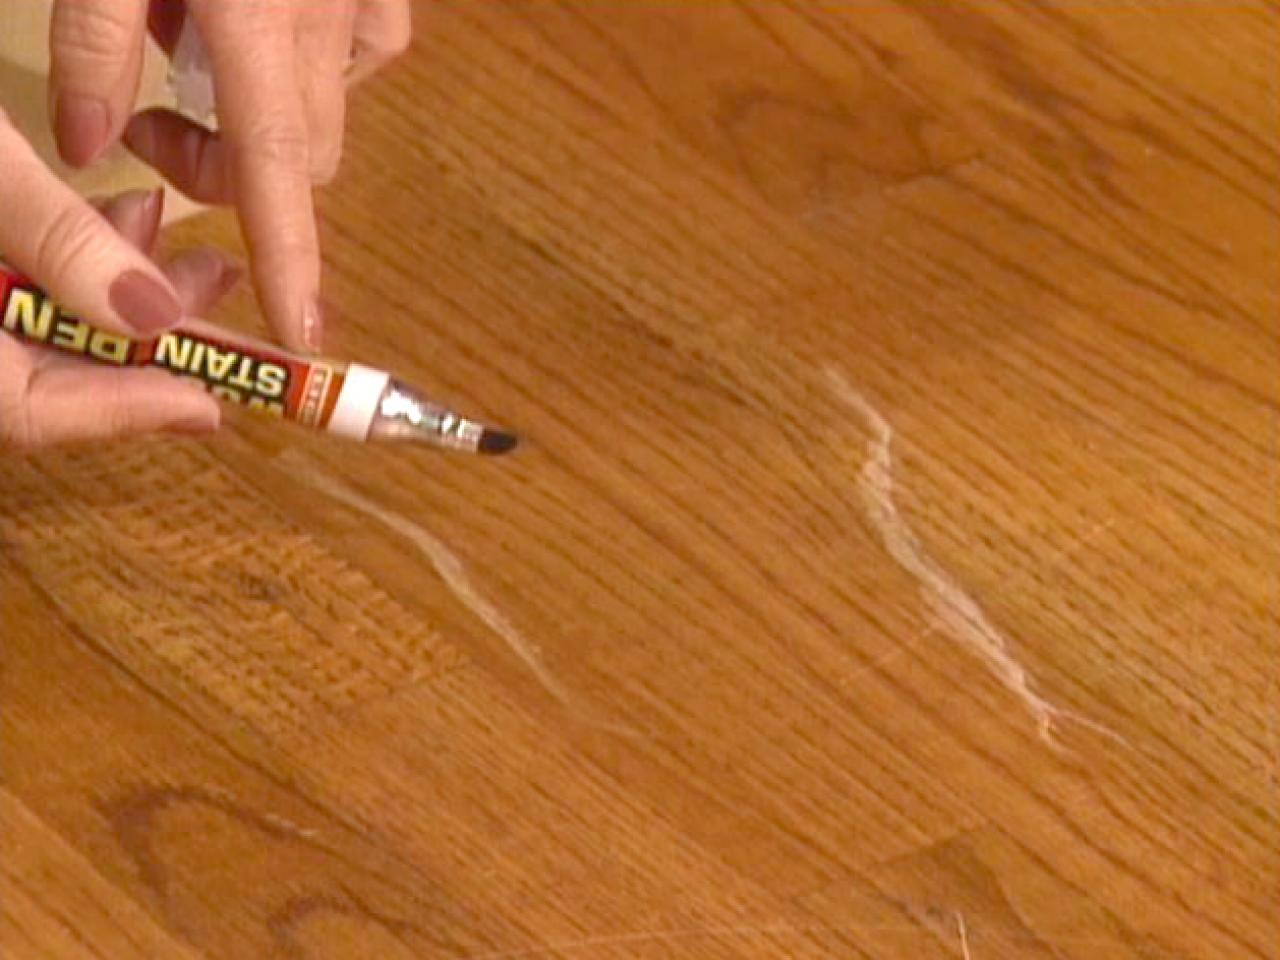 How To Touch Up Wood Floors Tos Diy, Stain Markers For Hardwood Floors